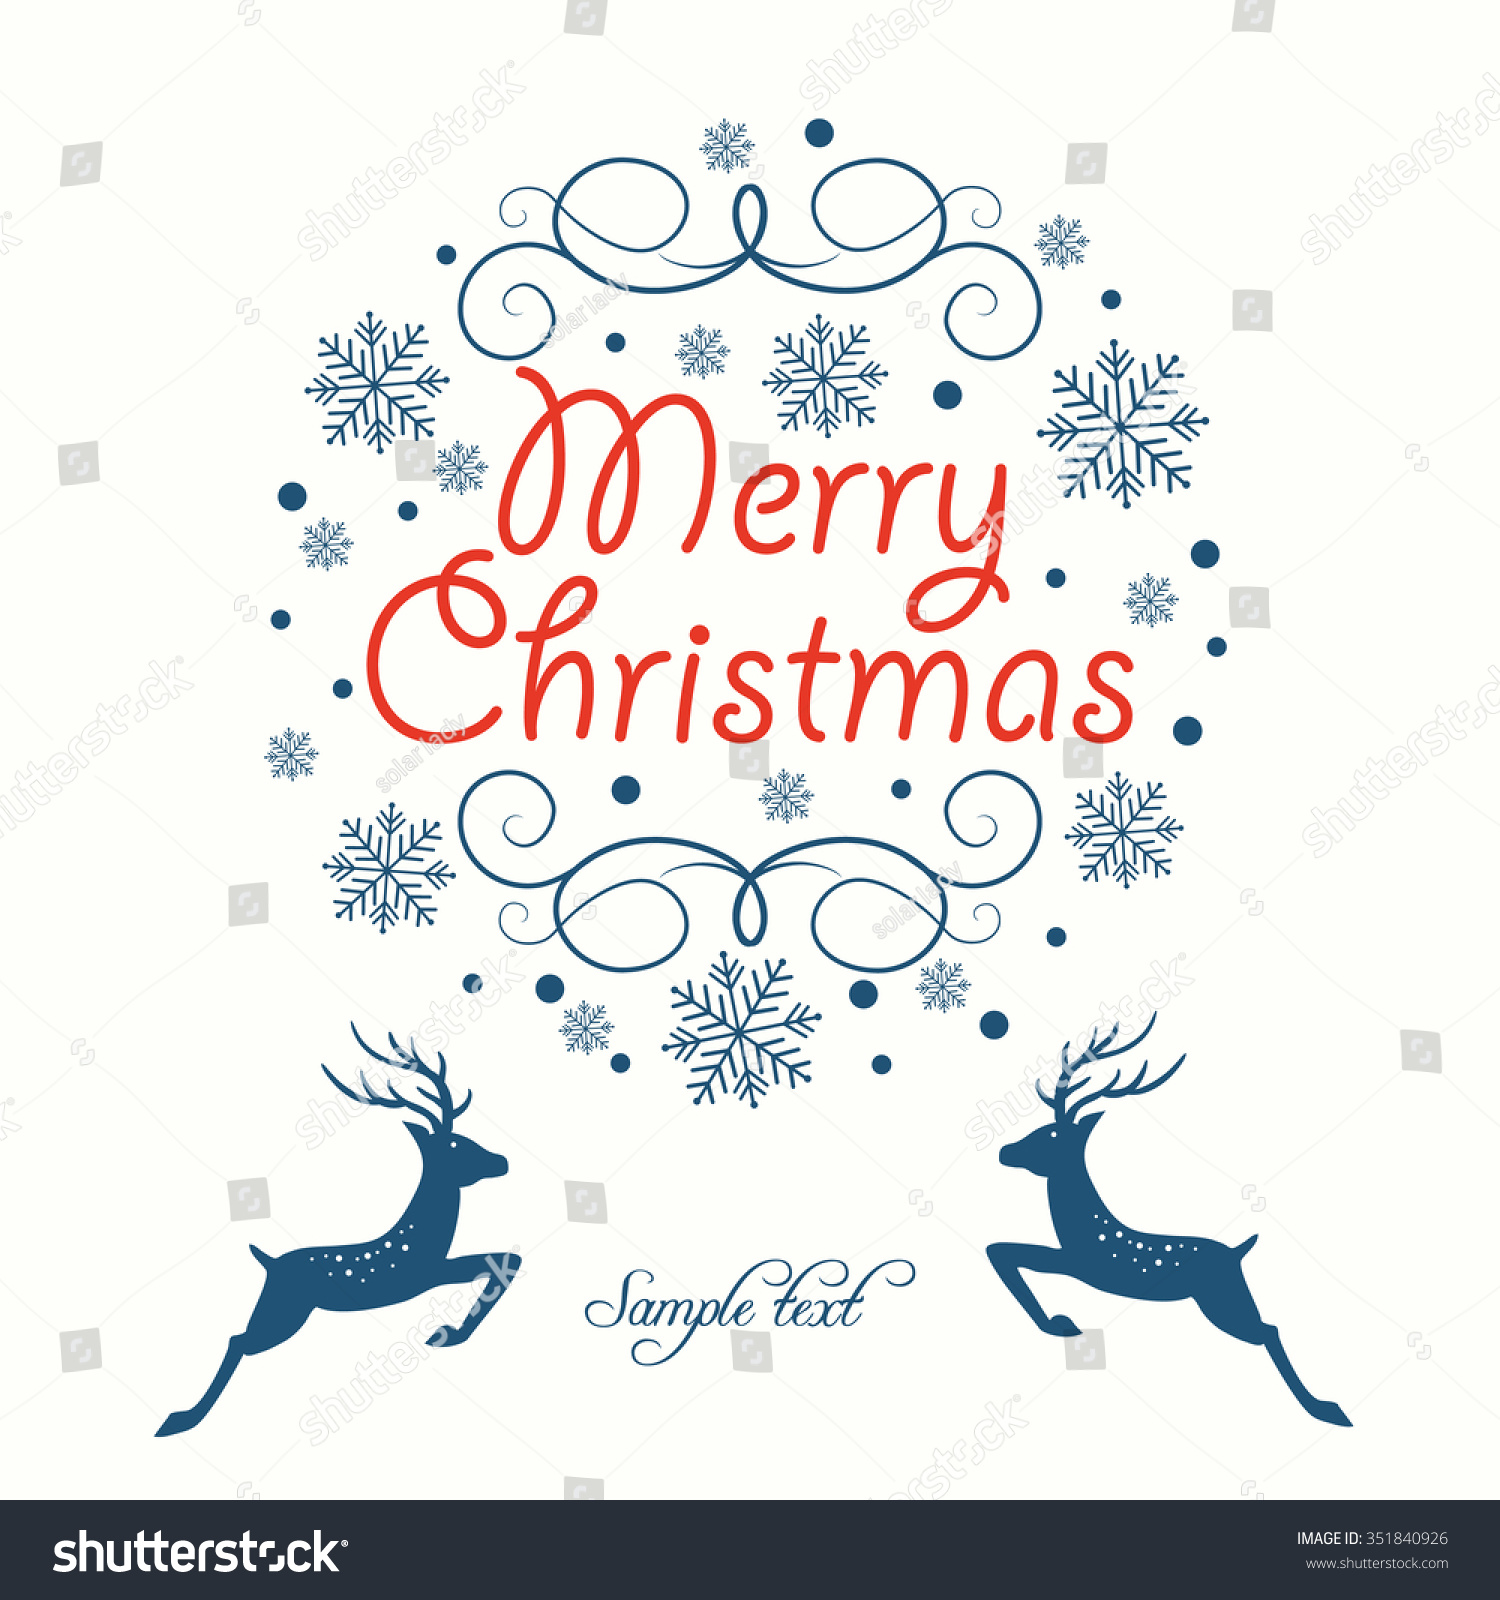 Greeting Card Merry Christmas Vector Illustration Stock Vector ...